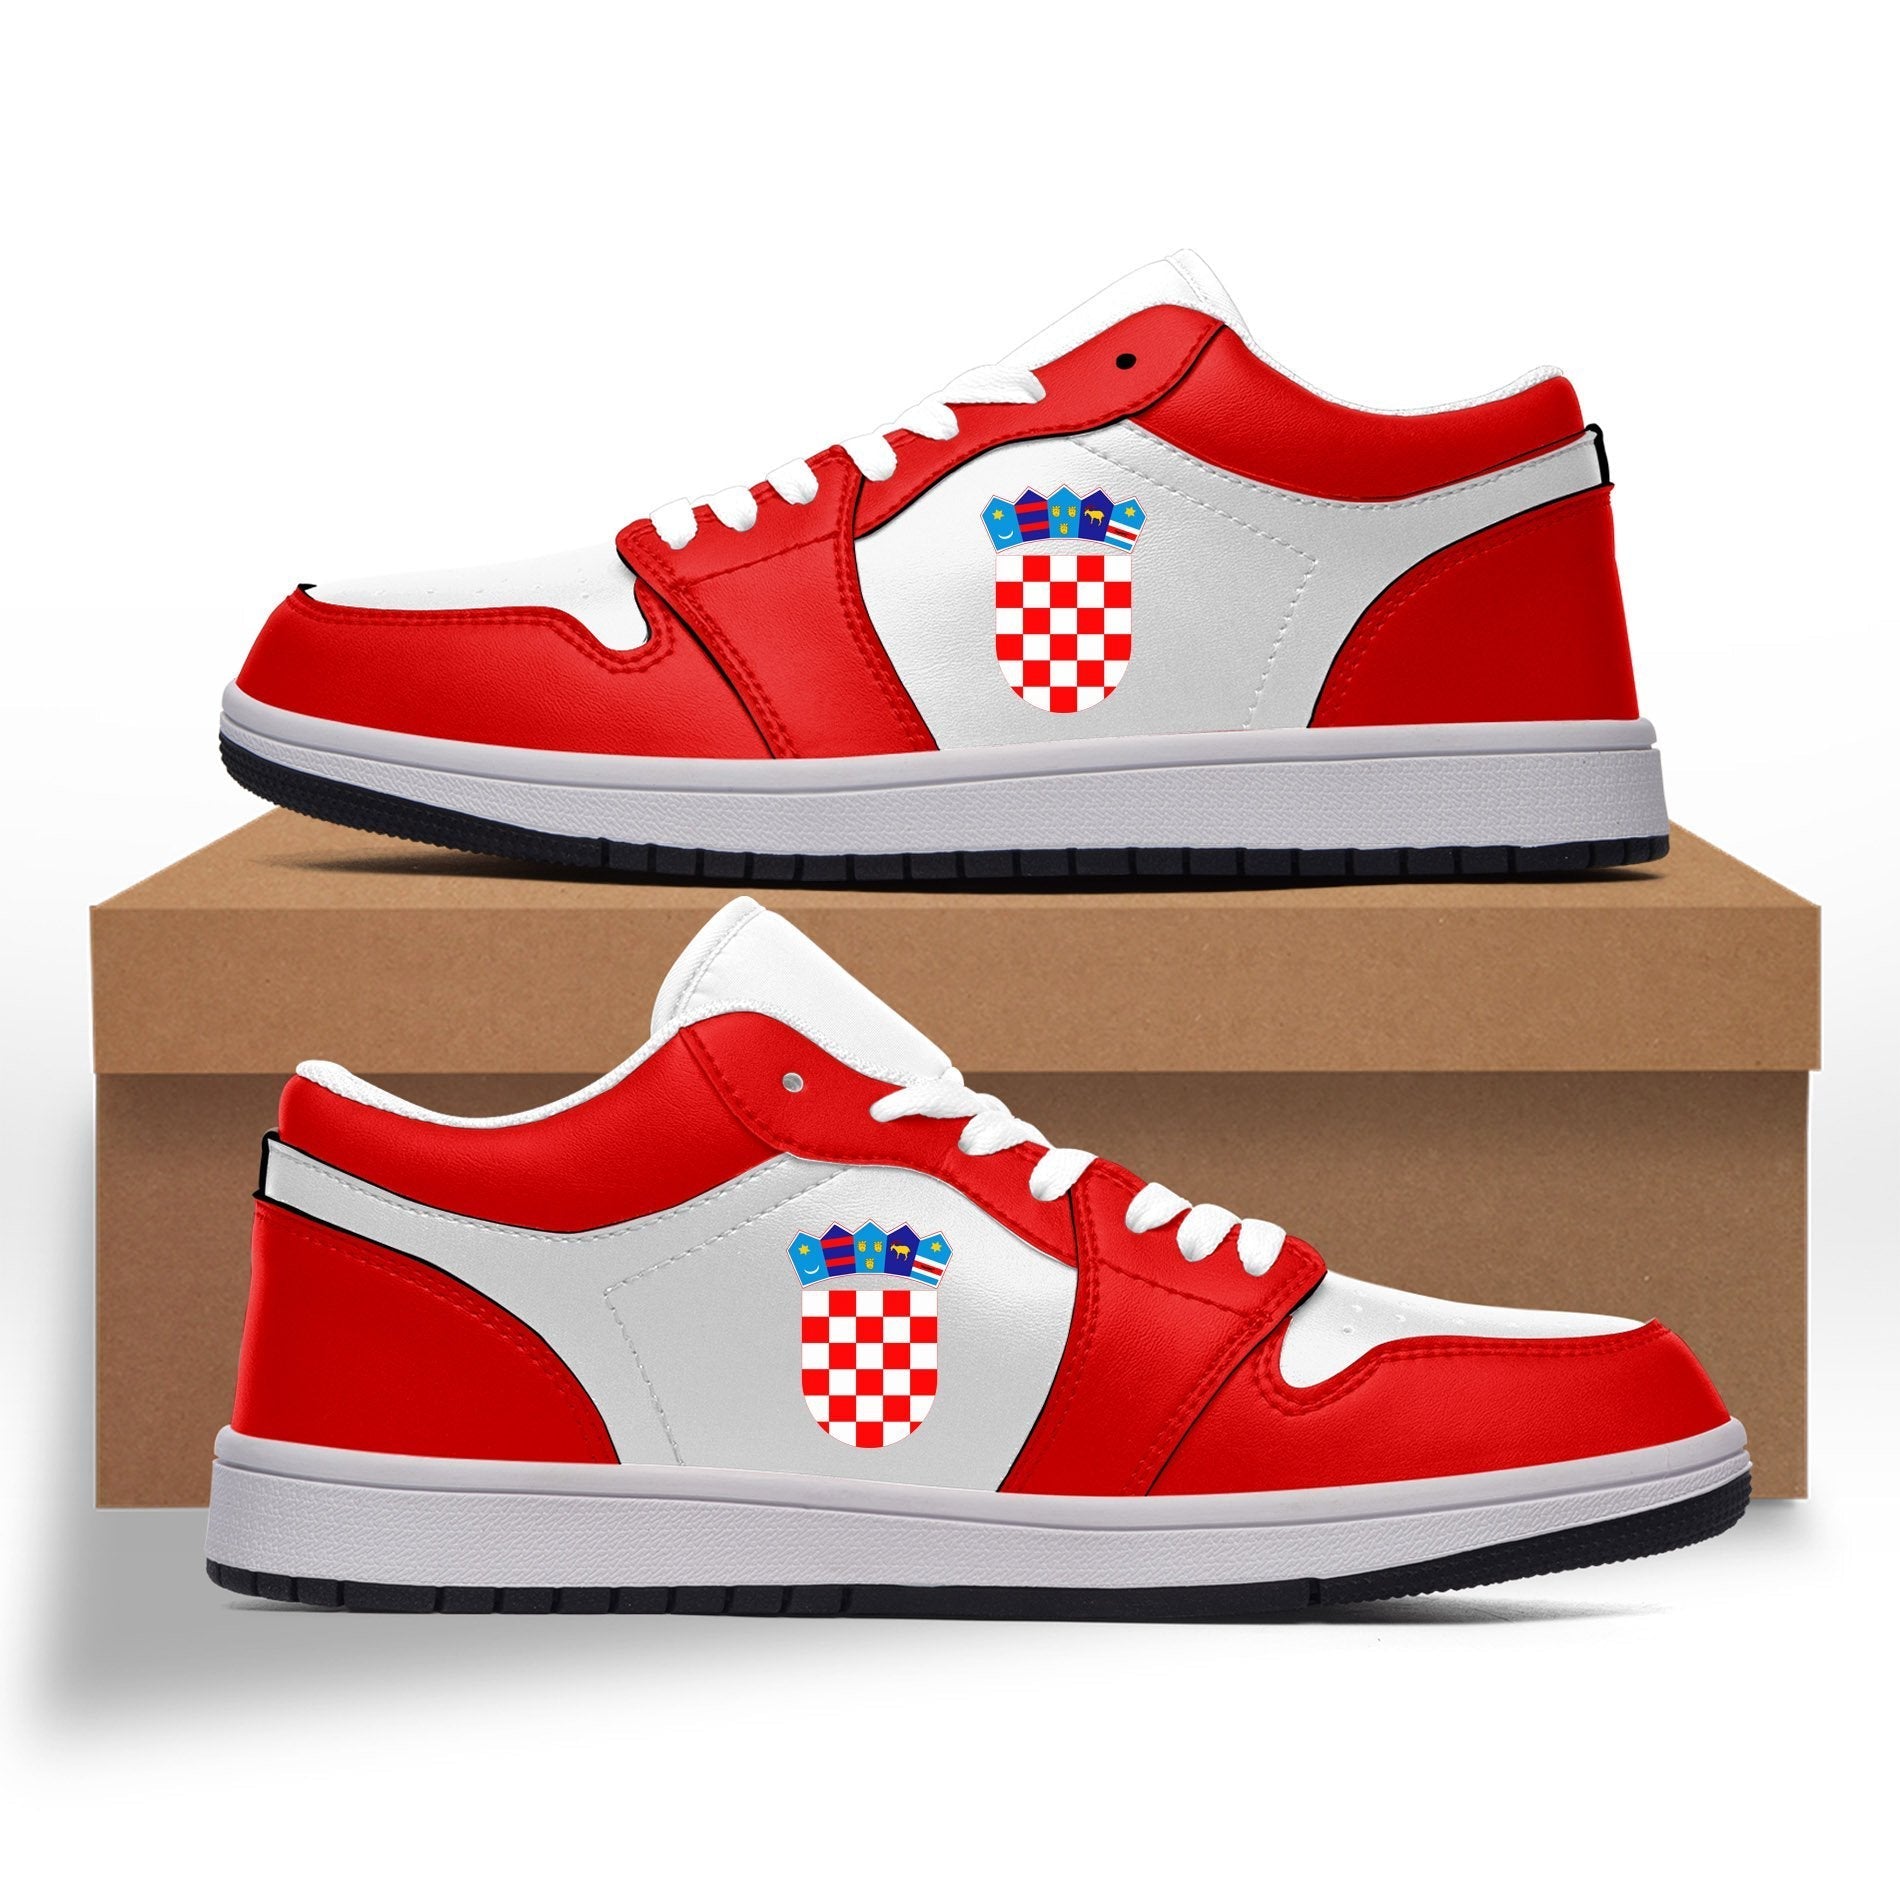 croatia-low-gym-red-white-sneakers